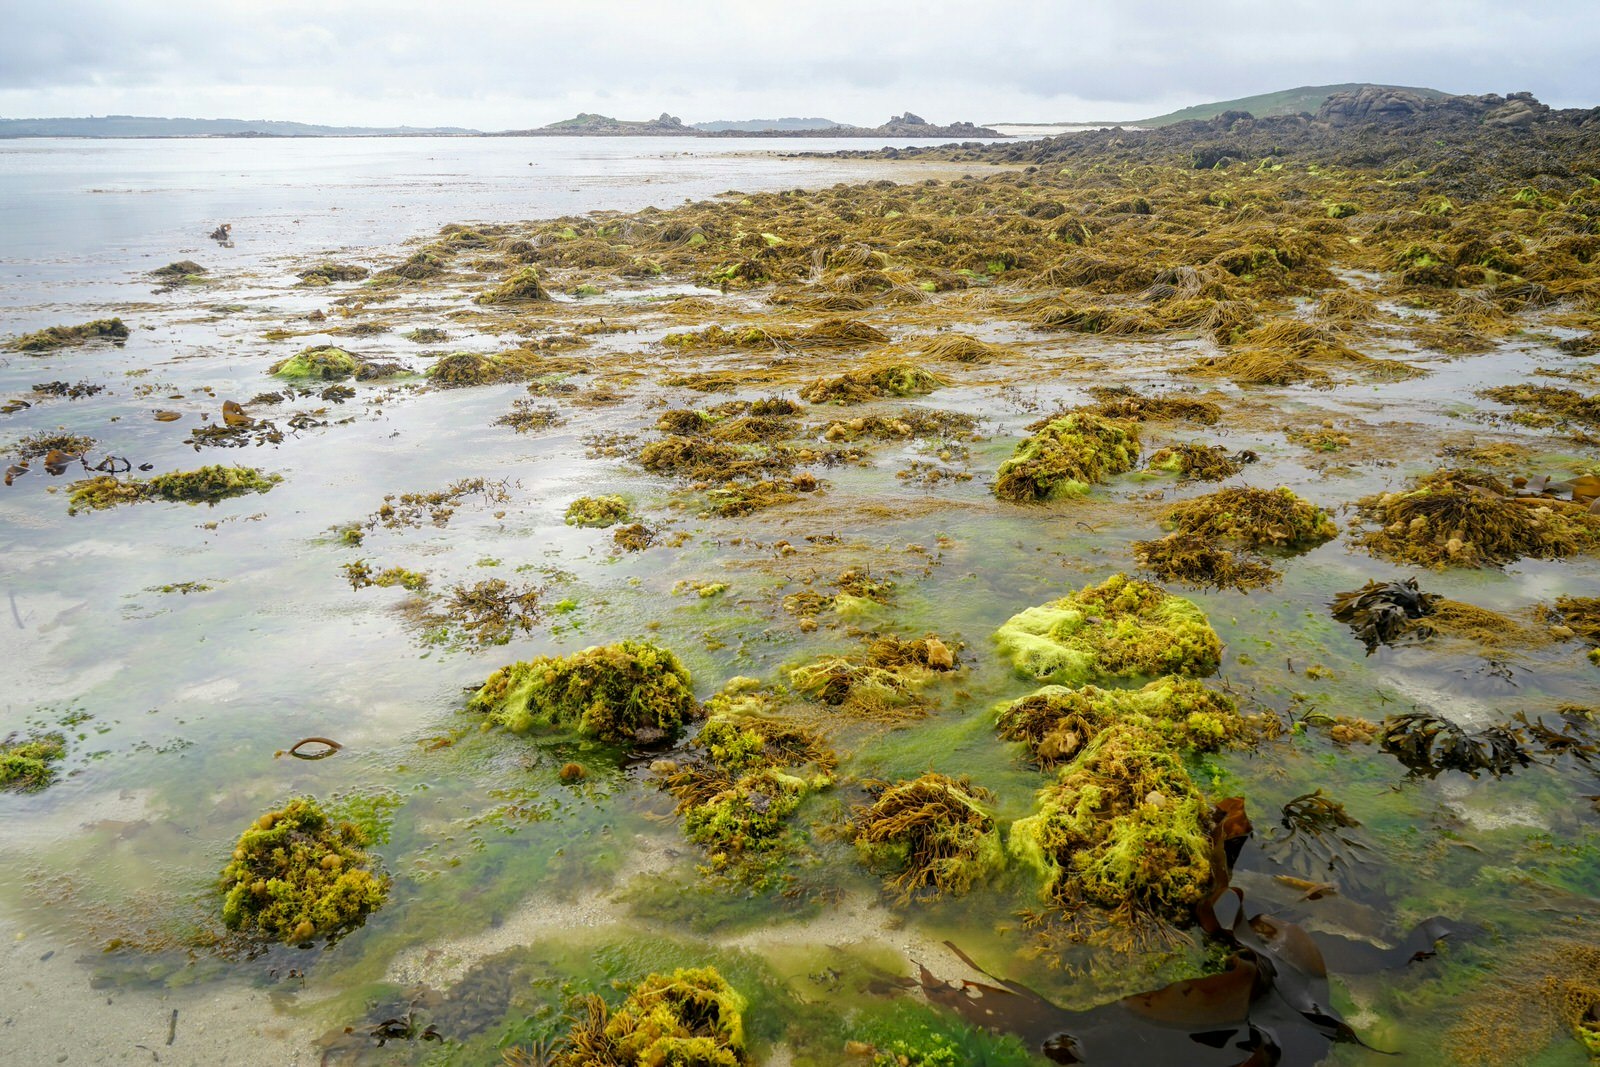 Rock pools and seaweed on Bryher, Isles of Scilly, England, UK © James Kay / Lonely Planet